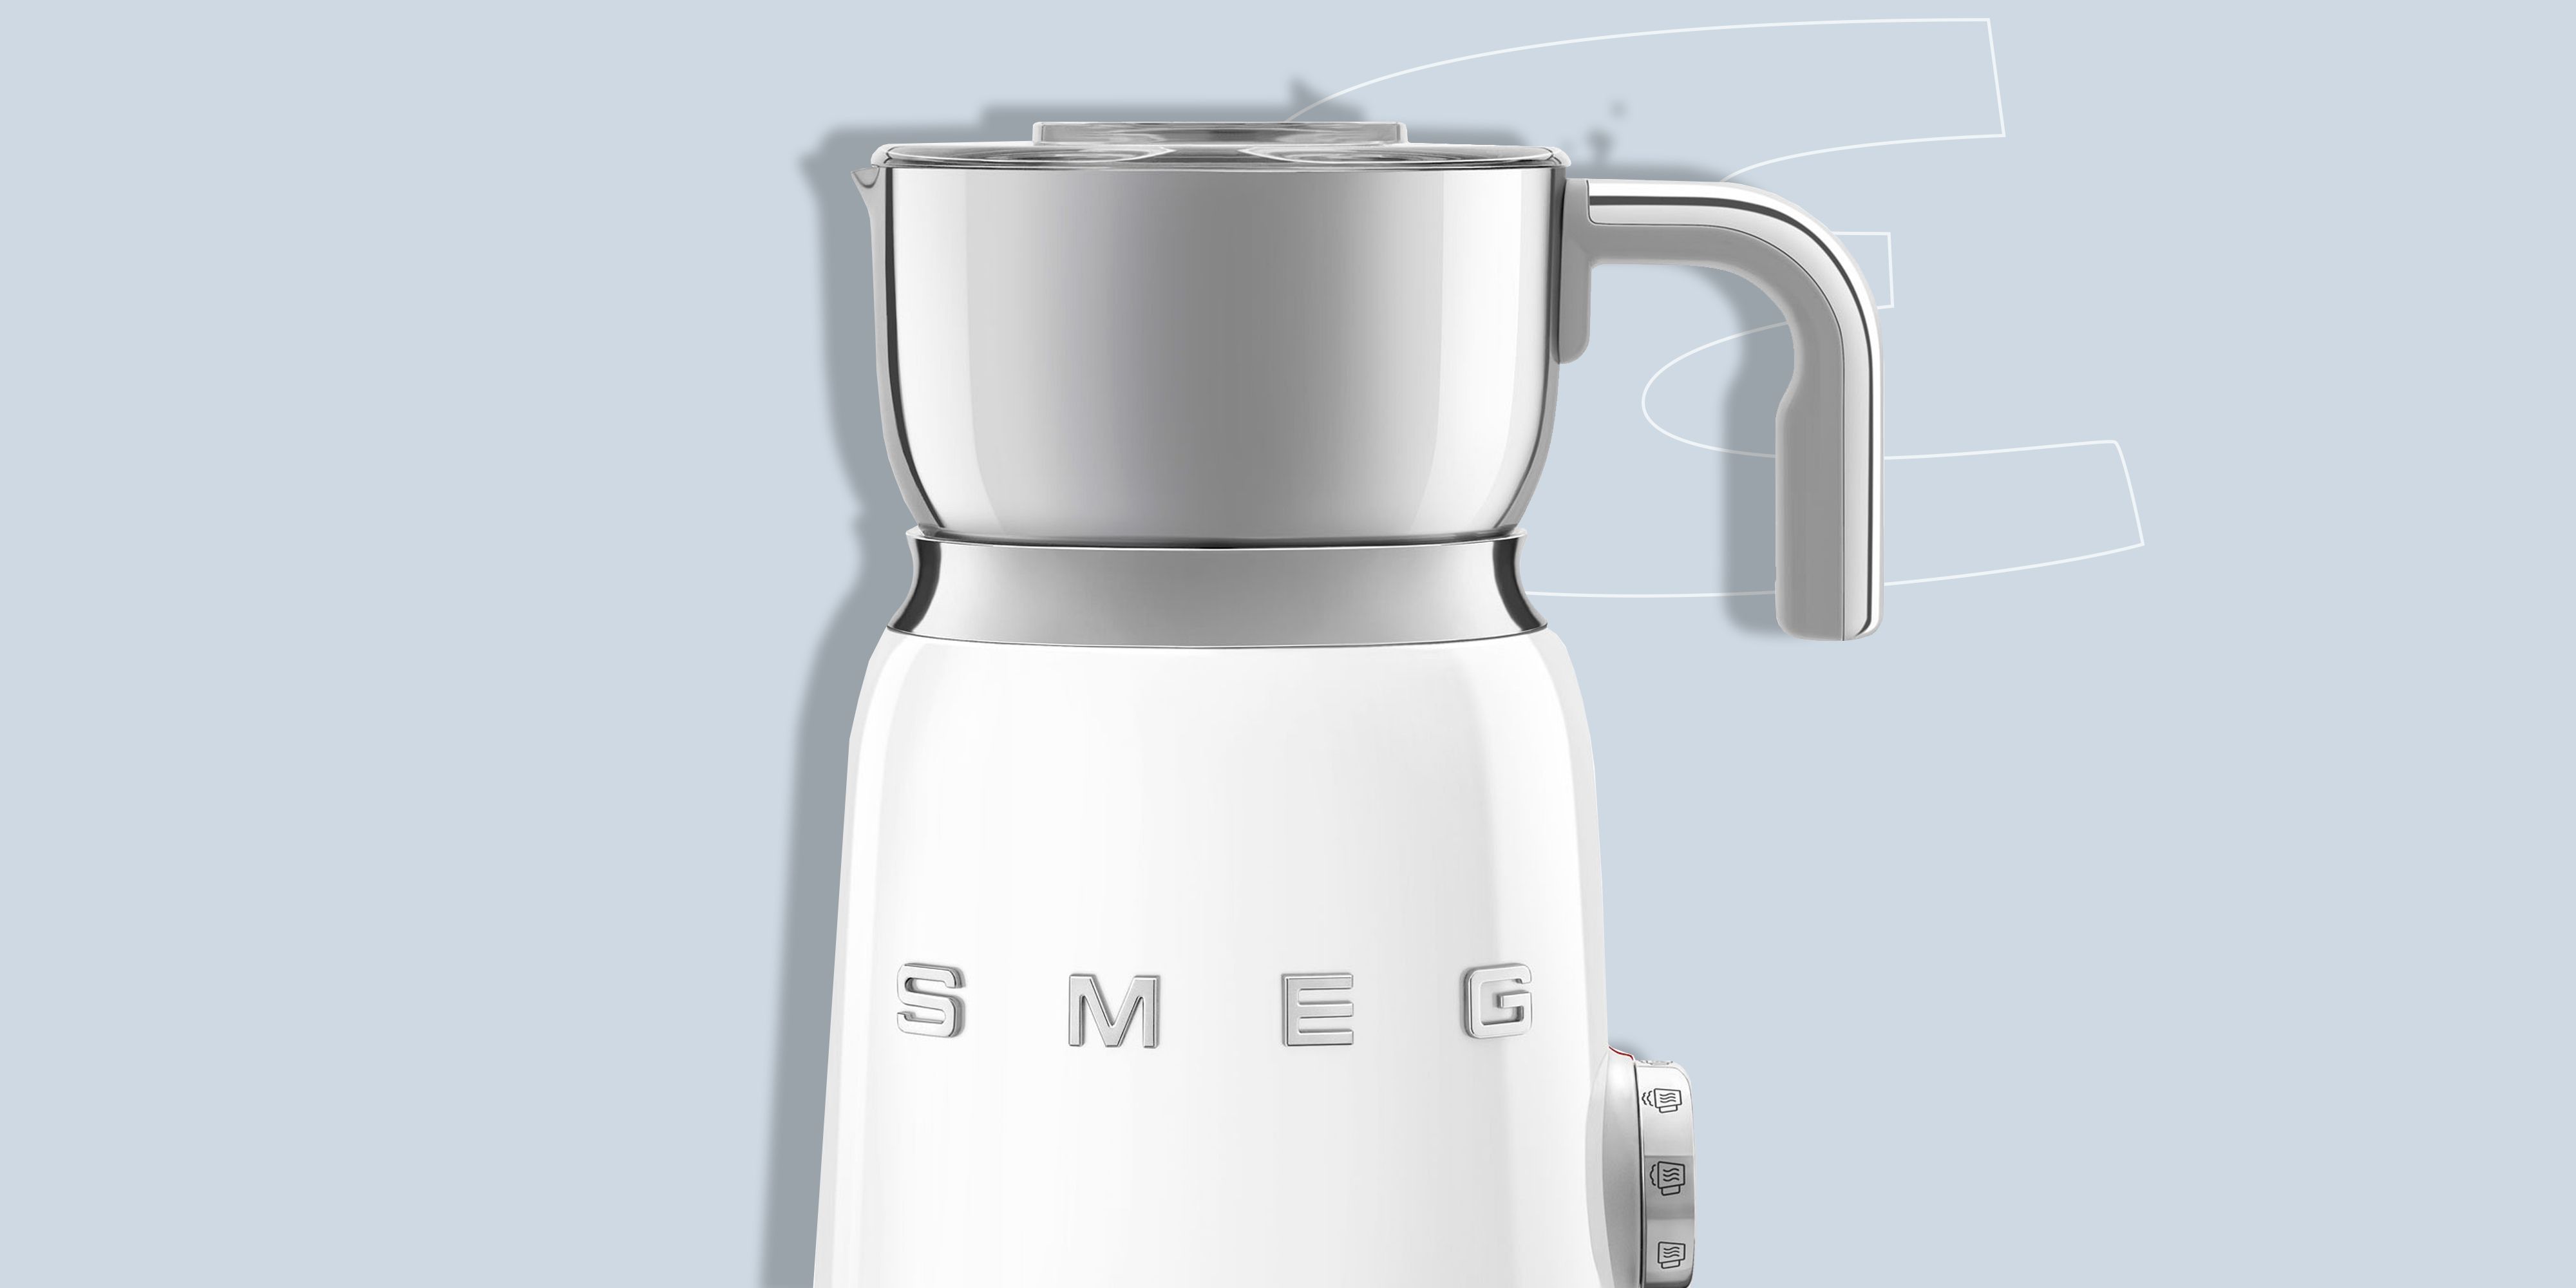 The Best Milk Frothers And Steamers For Your Home Coffee Bar